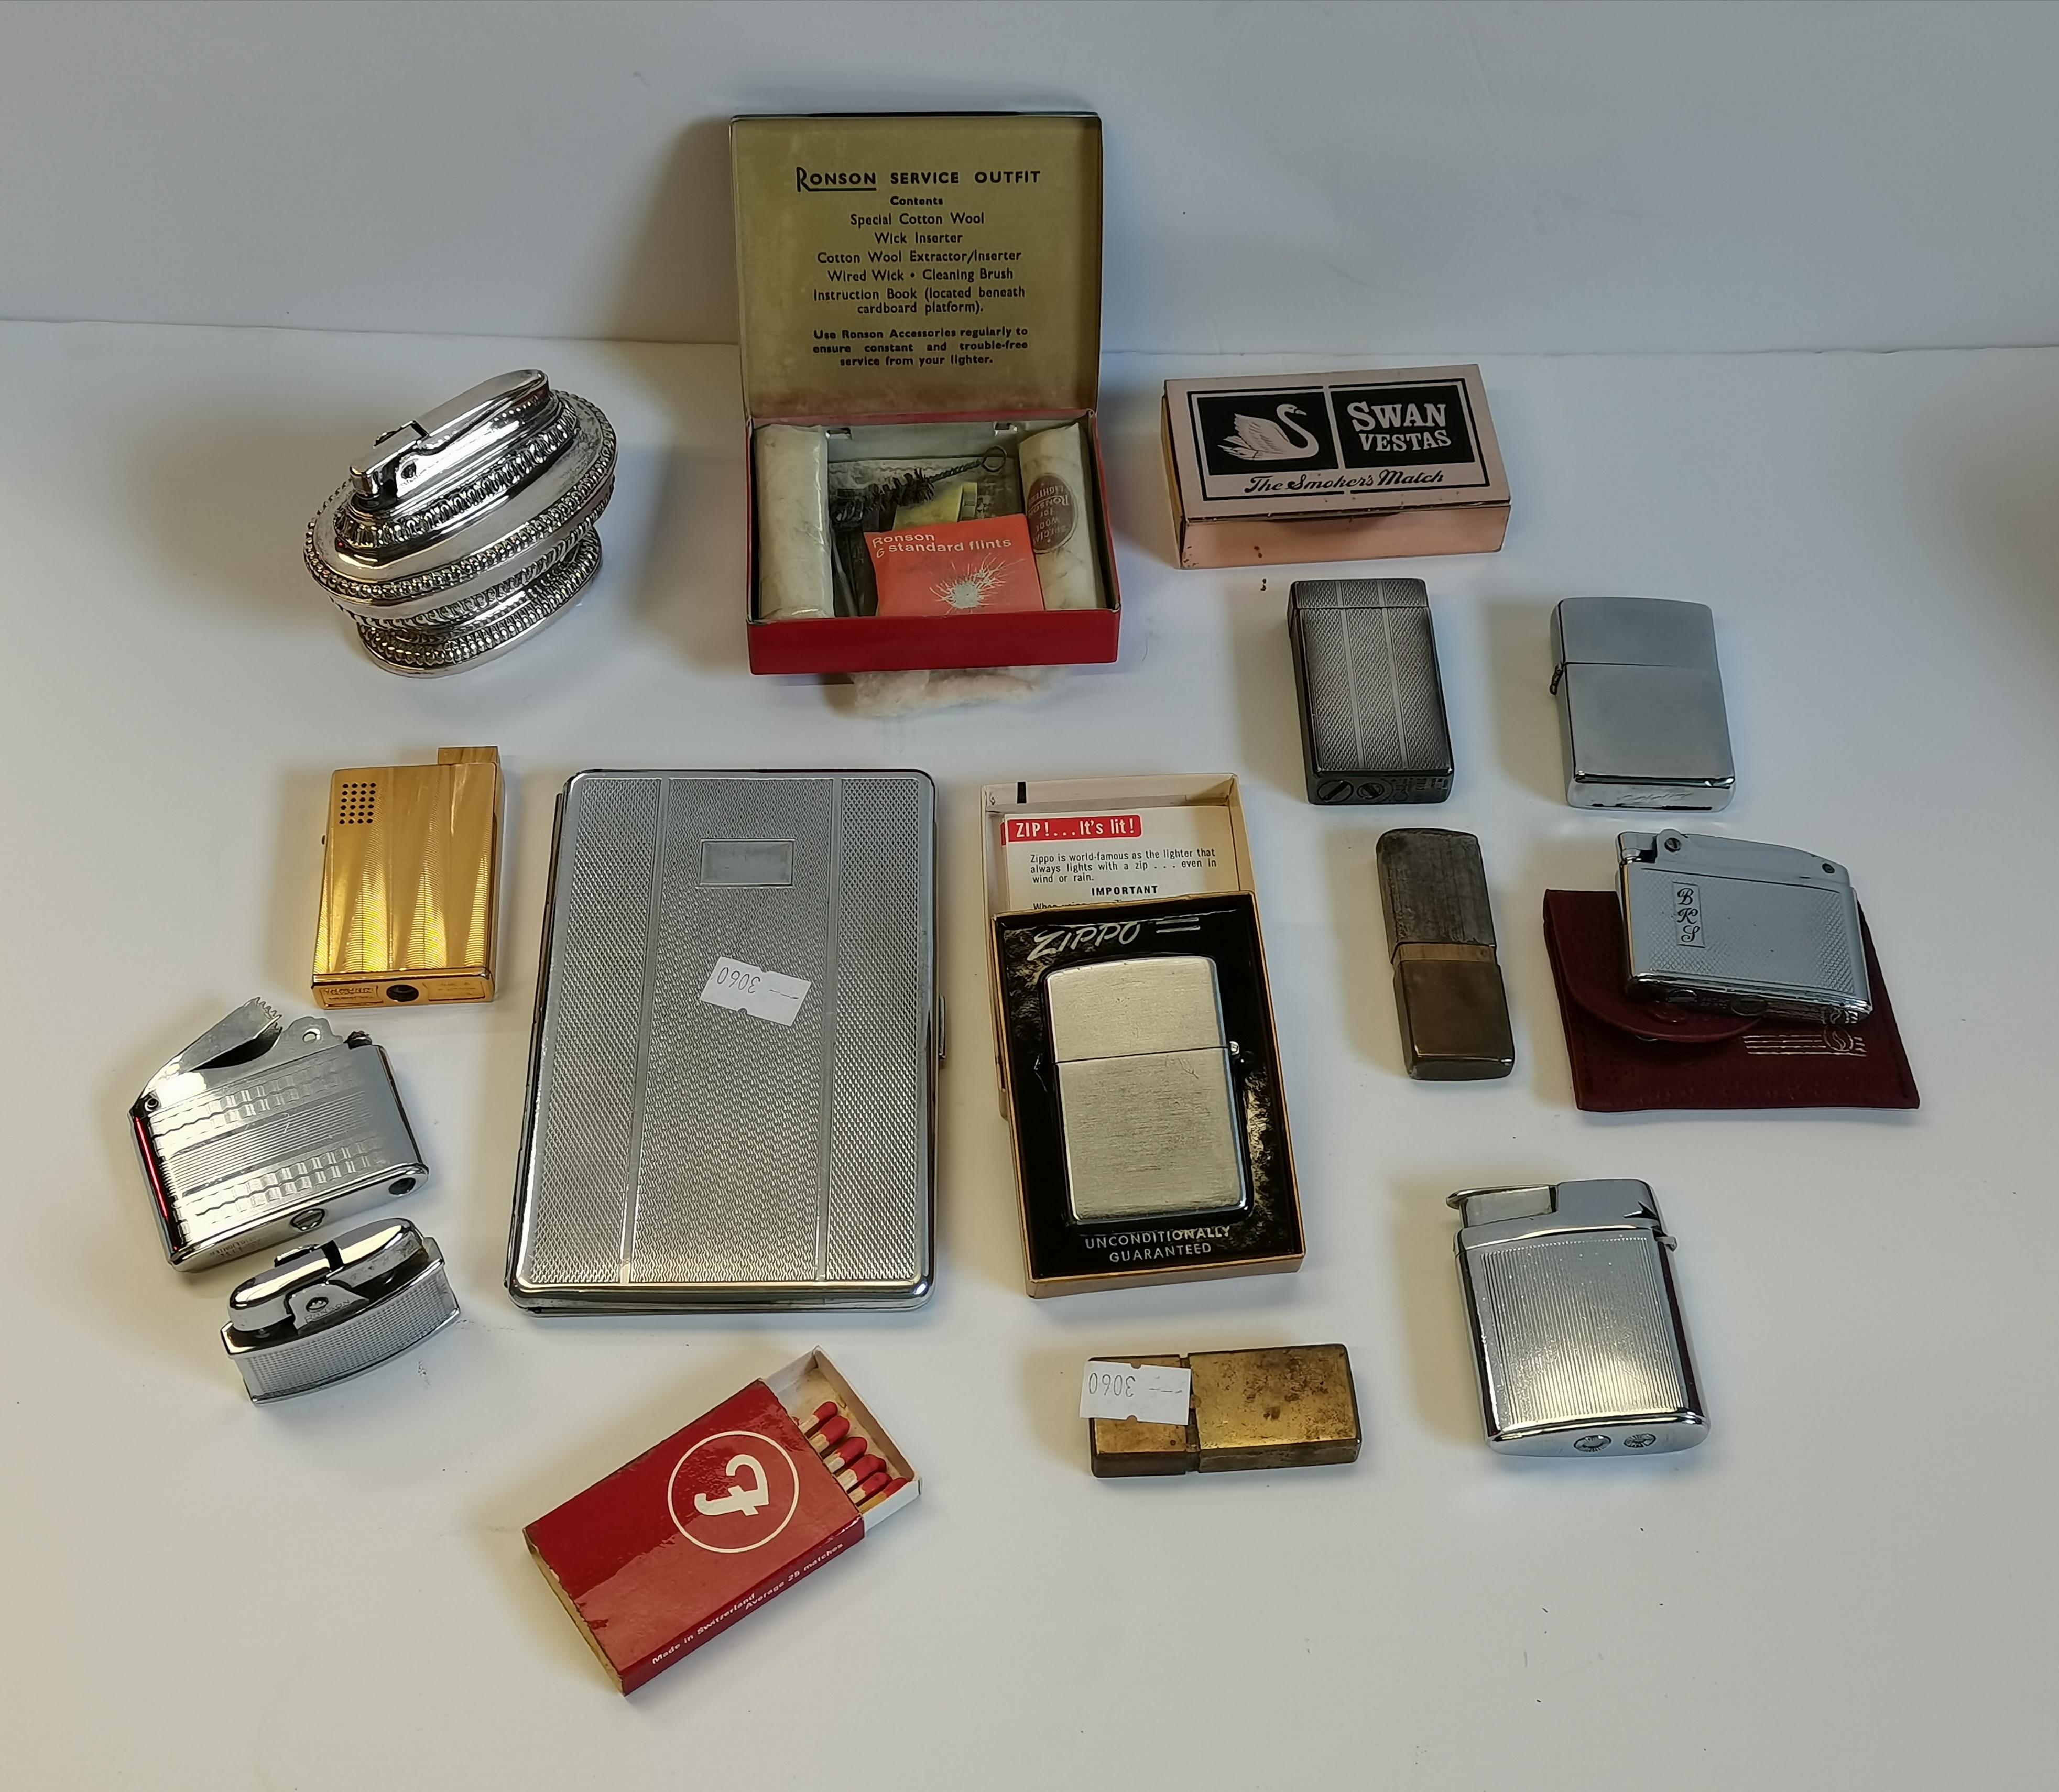 Smokers accessories incl vintage zippo lighter in box, Ronson Service outfit etc